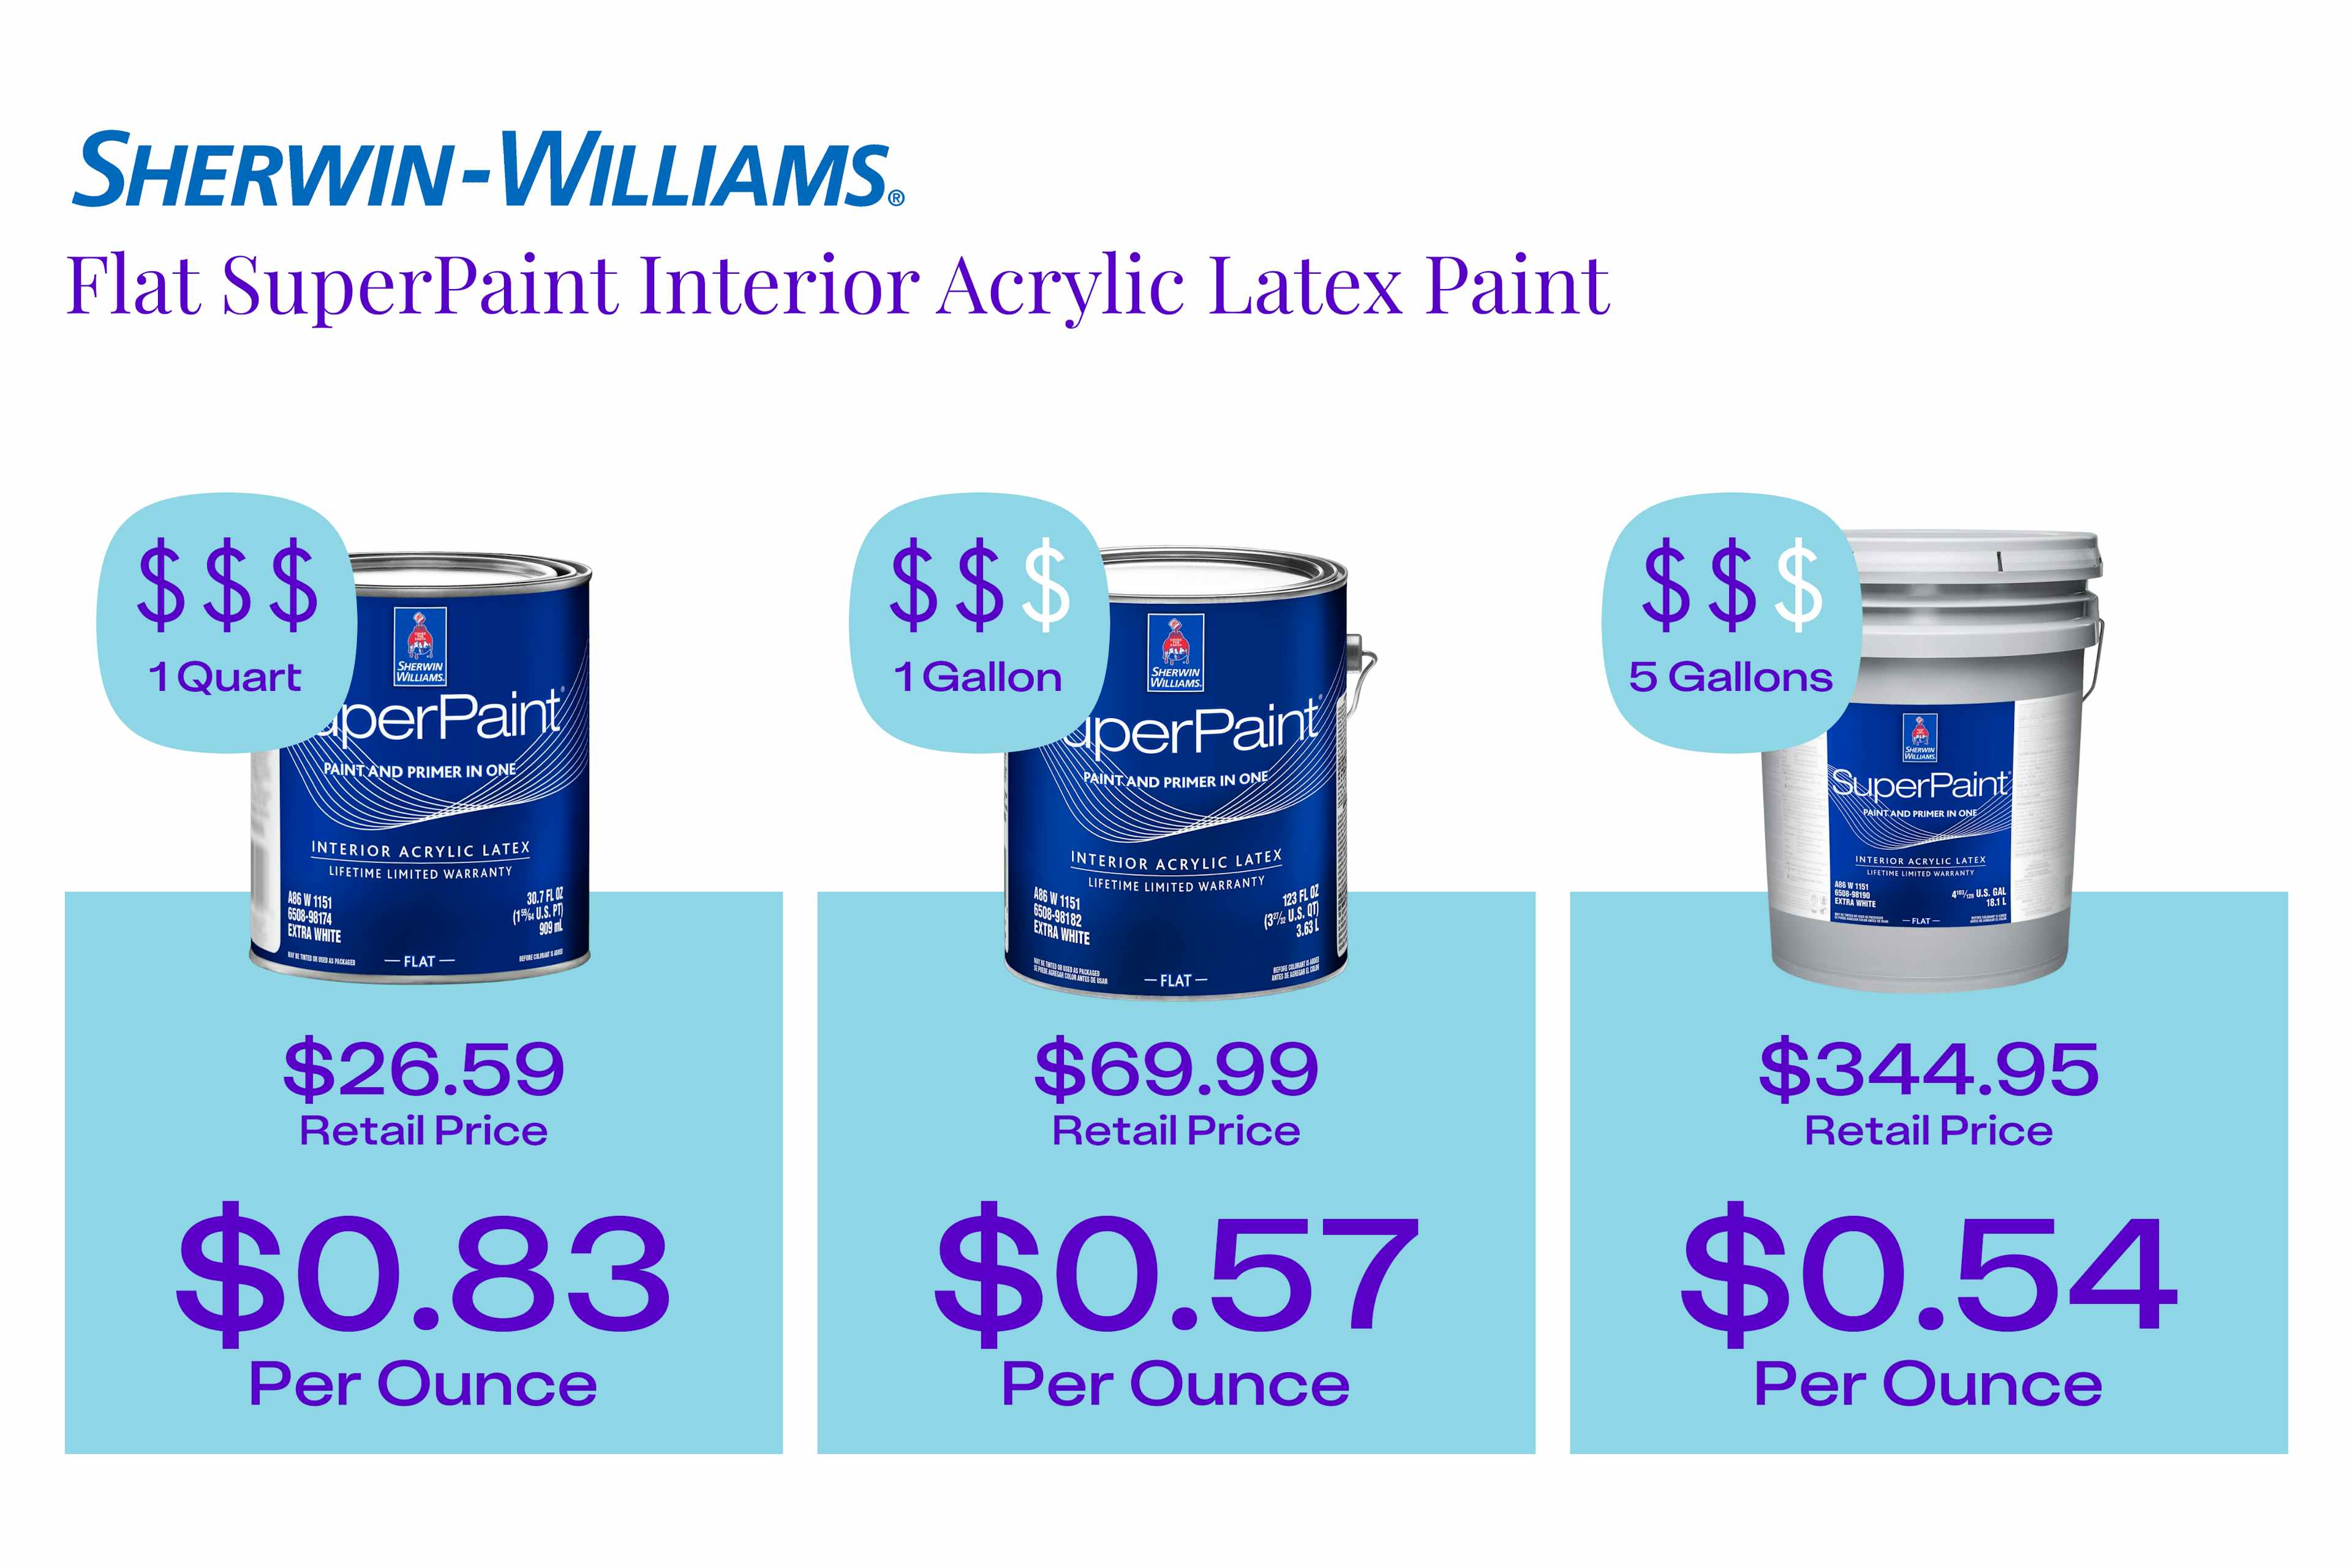 a graphic showing the price per ounce for three different sizes of paint from Sherwin Williams